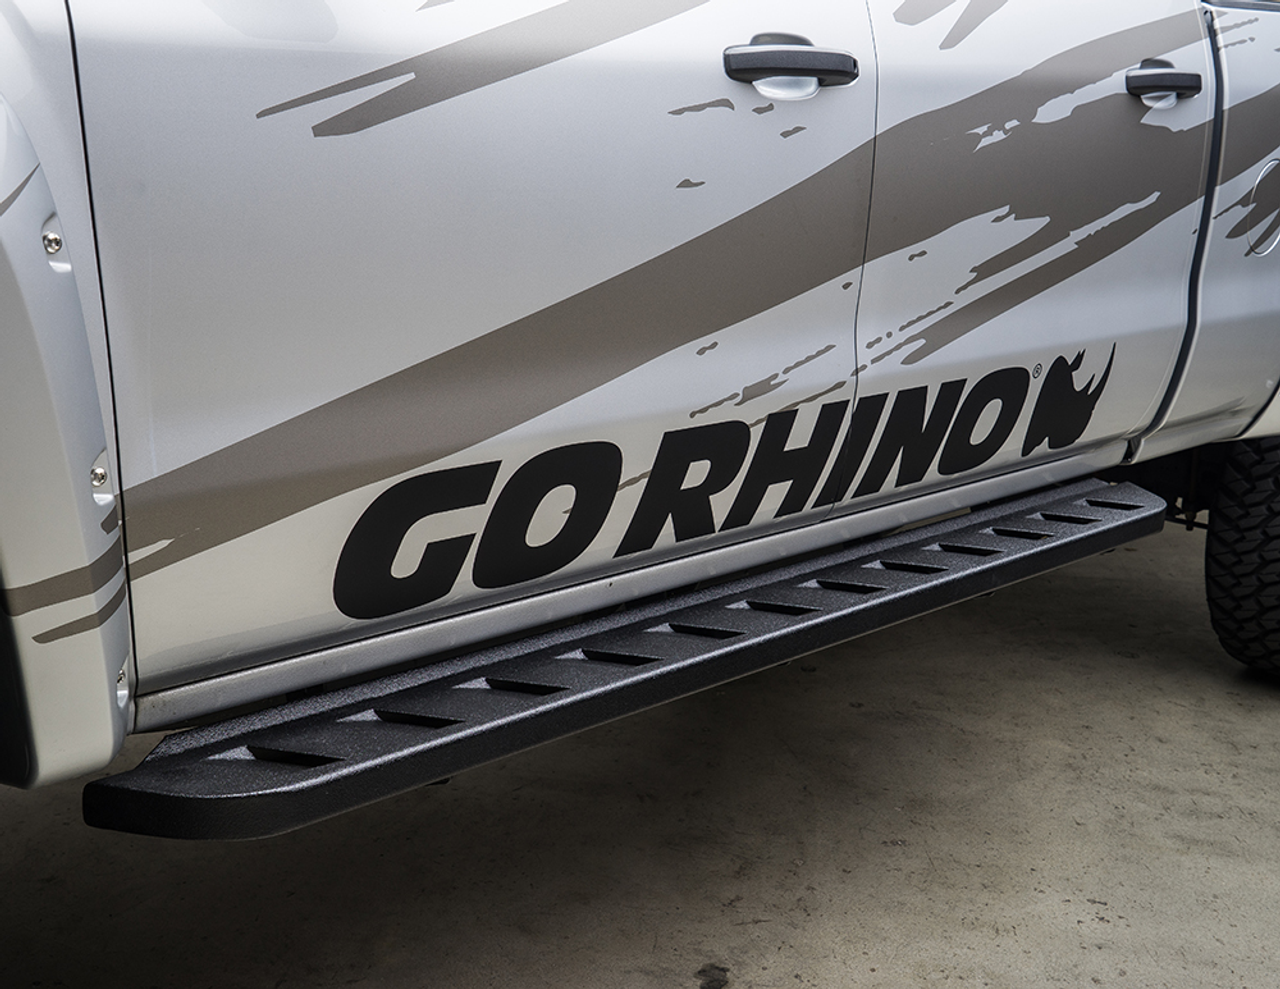 Go Rhino 6340488720T Chevy, Silverado 1500, 2019 - 2021, RB10 Running boards - Complete Kit:  2 pair RB10 Drop Steps, Galvanized Steel,  Bedliner coating, 630087T RB10 + 6940485 RB Brackets + (2) 69420000T Drop Down Step, New Body Style Only